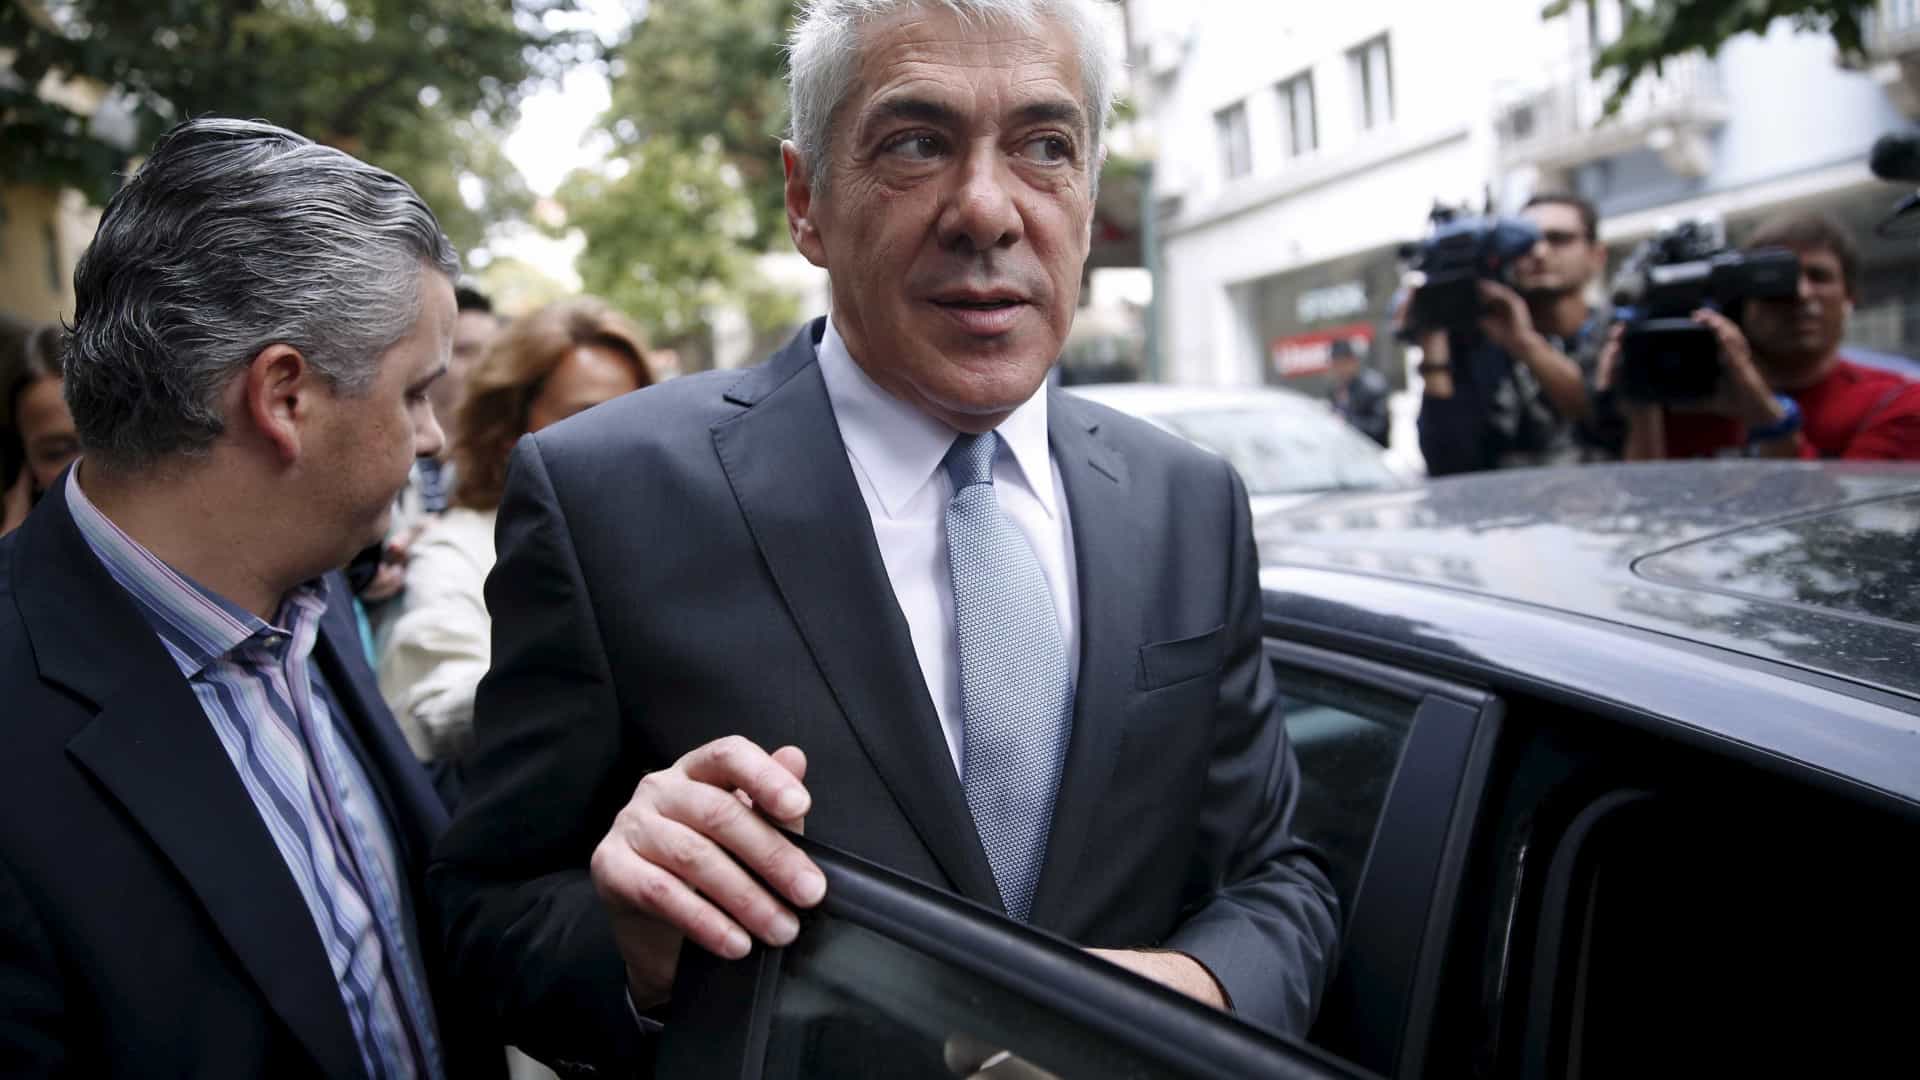 Former Portuguese Prime Minister Socrates will be tried on suspicion of money laundering and forging documents.